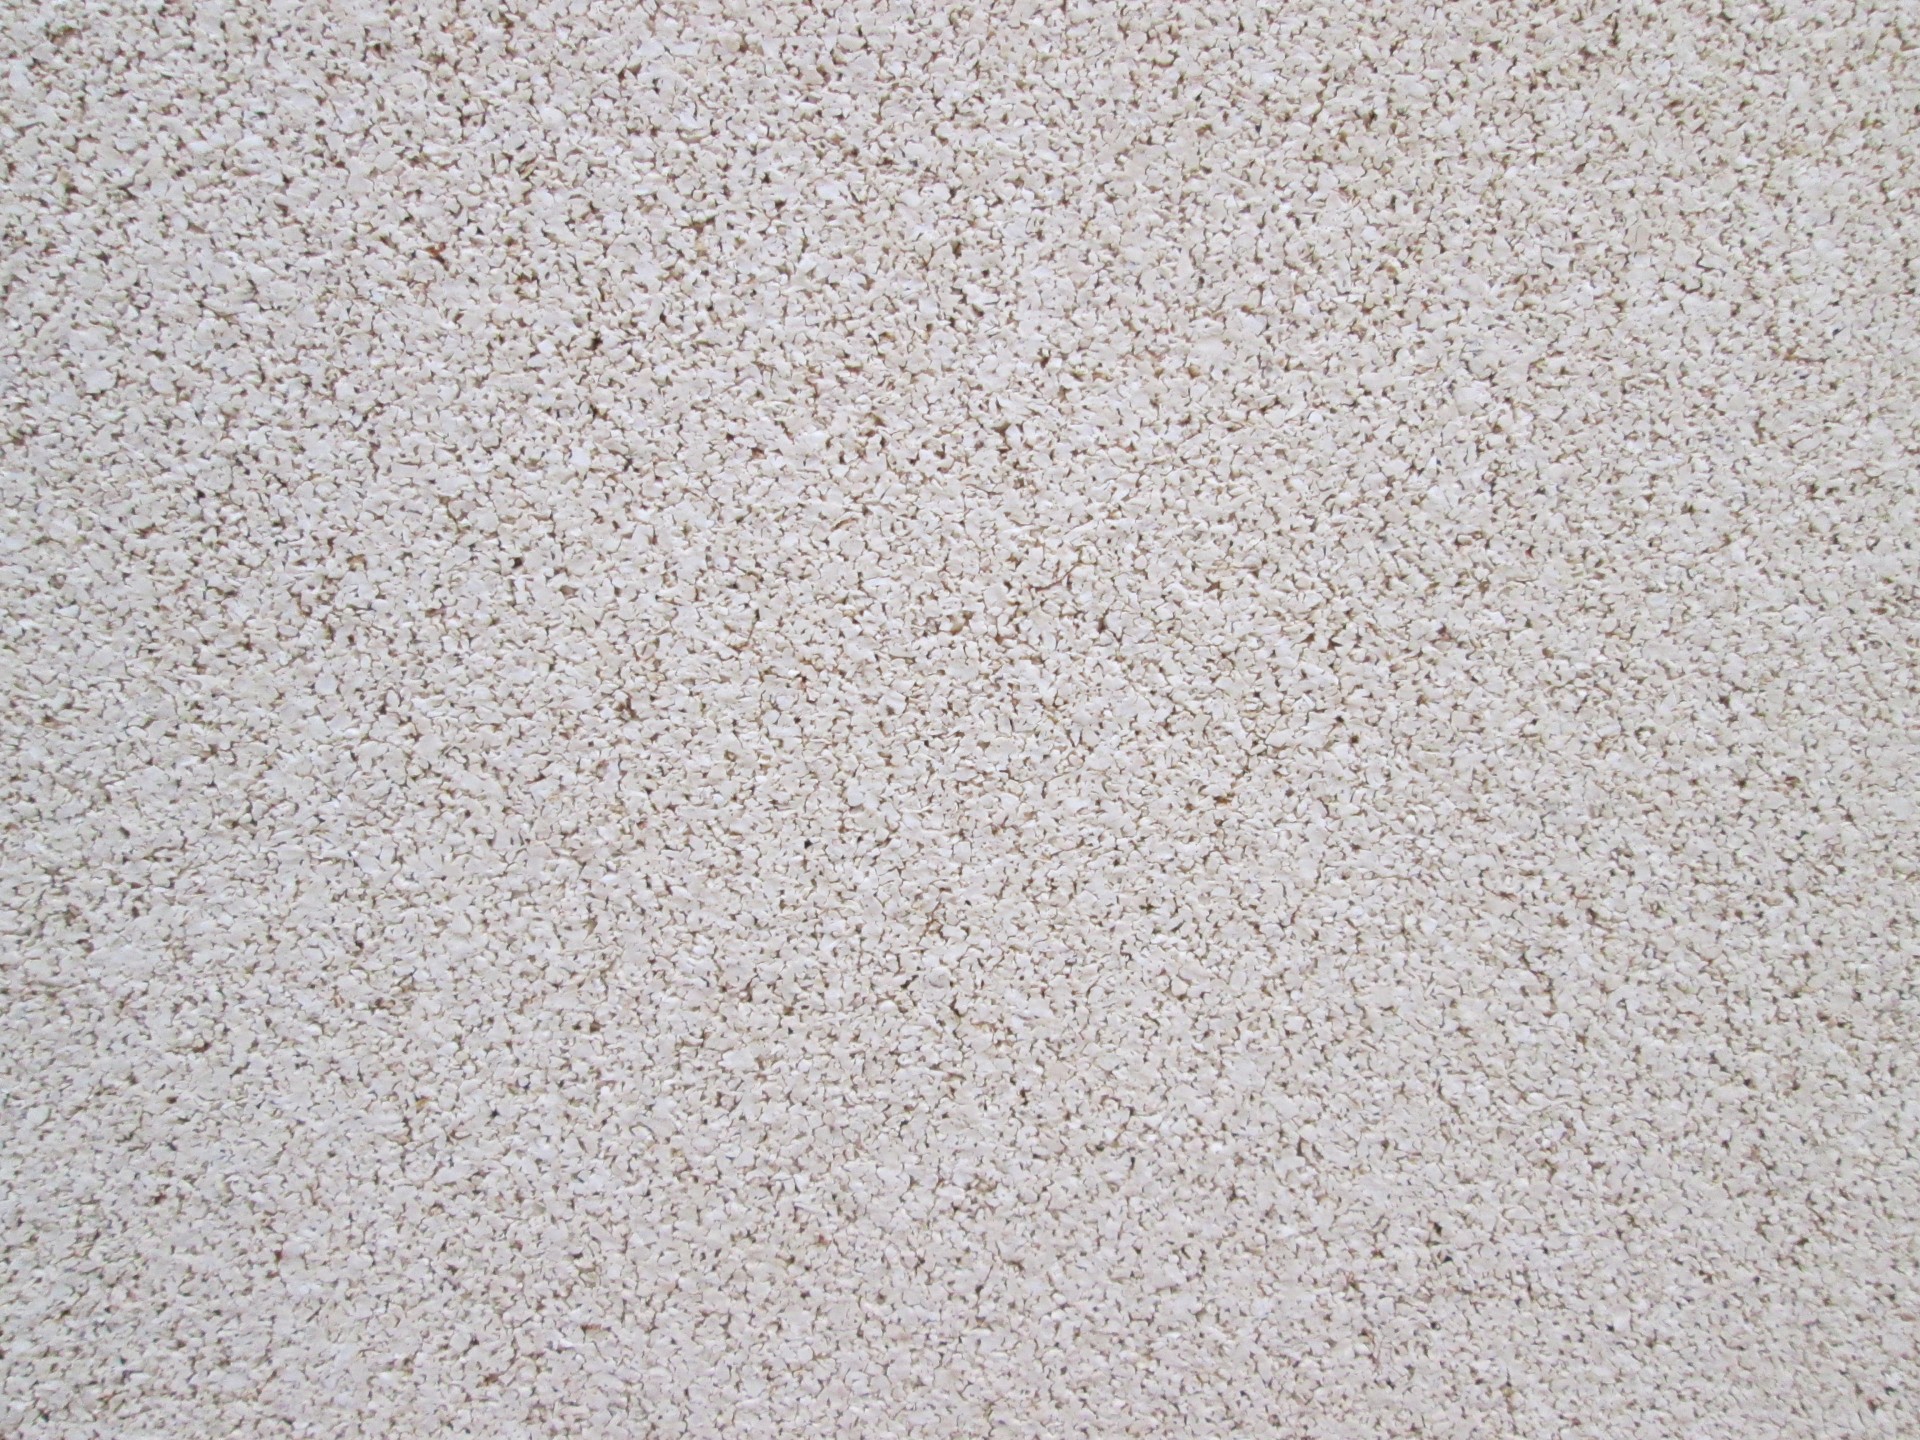 Corkboard, textural photograph for backgrounds etc.